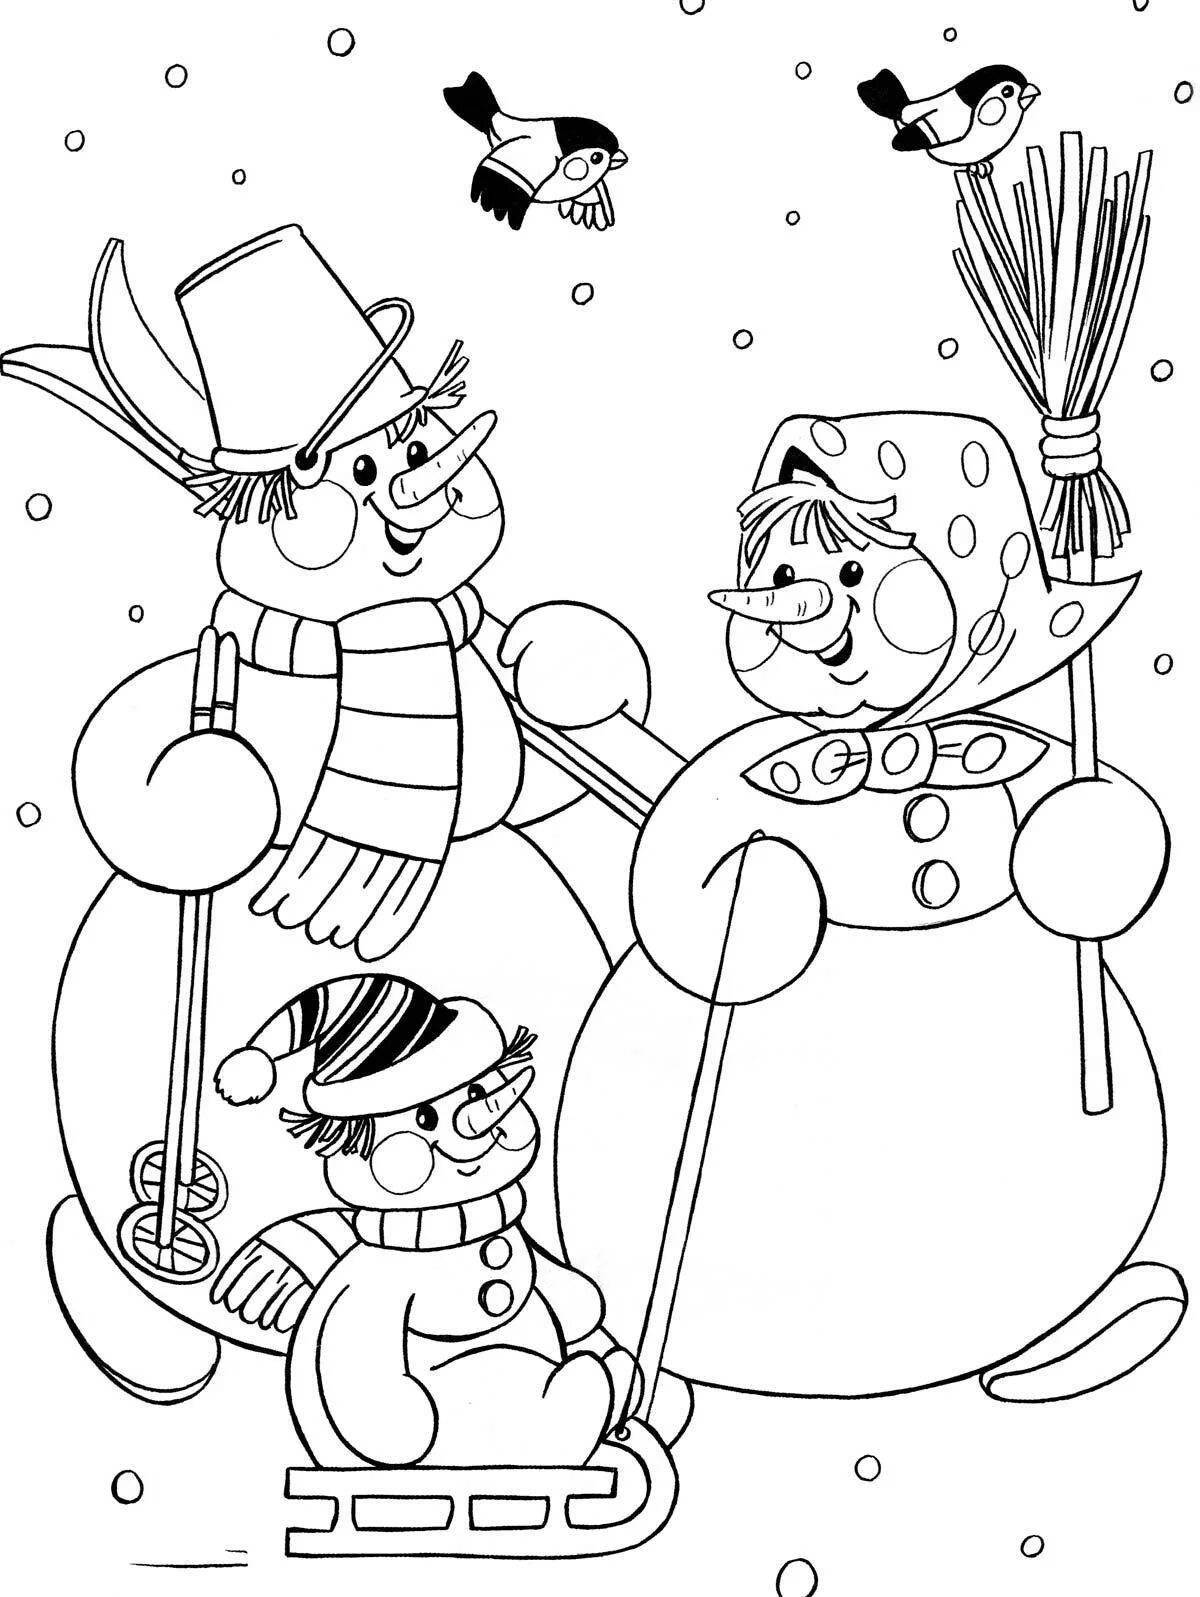 Coloring book bright snowman on a sleigh